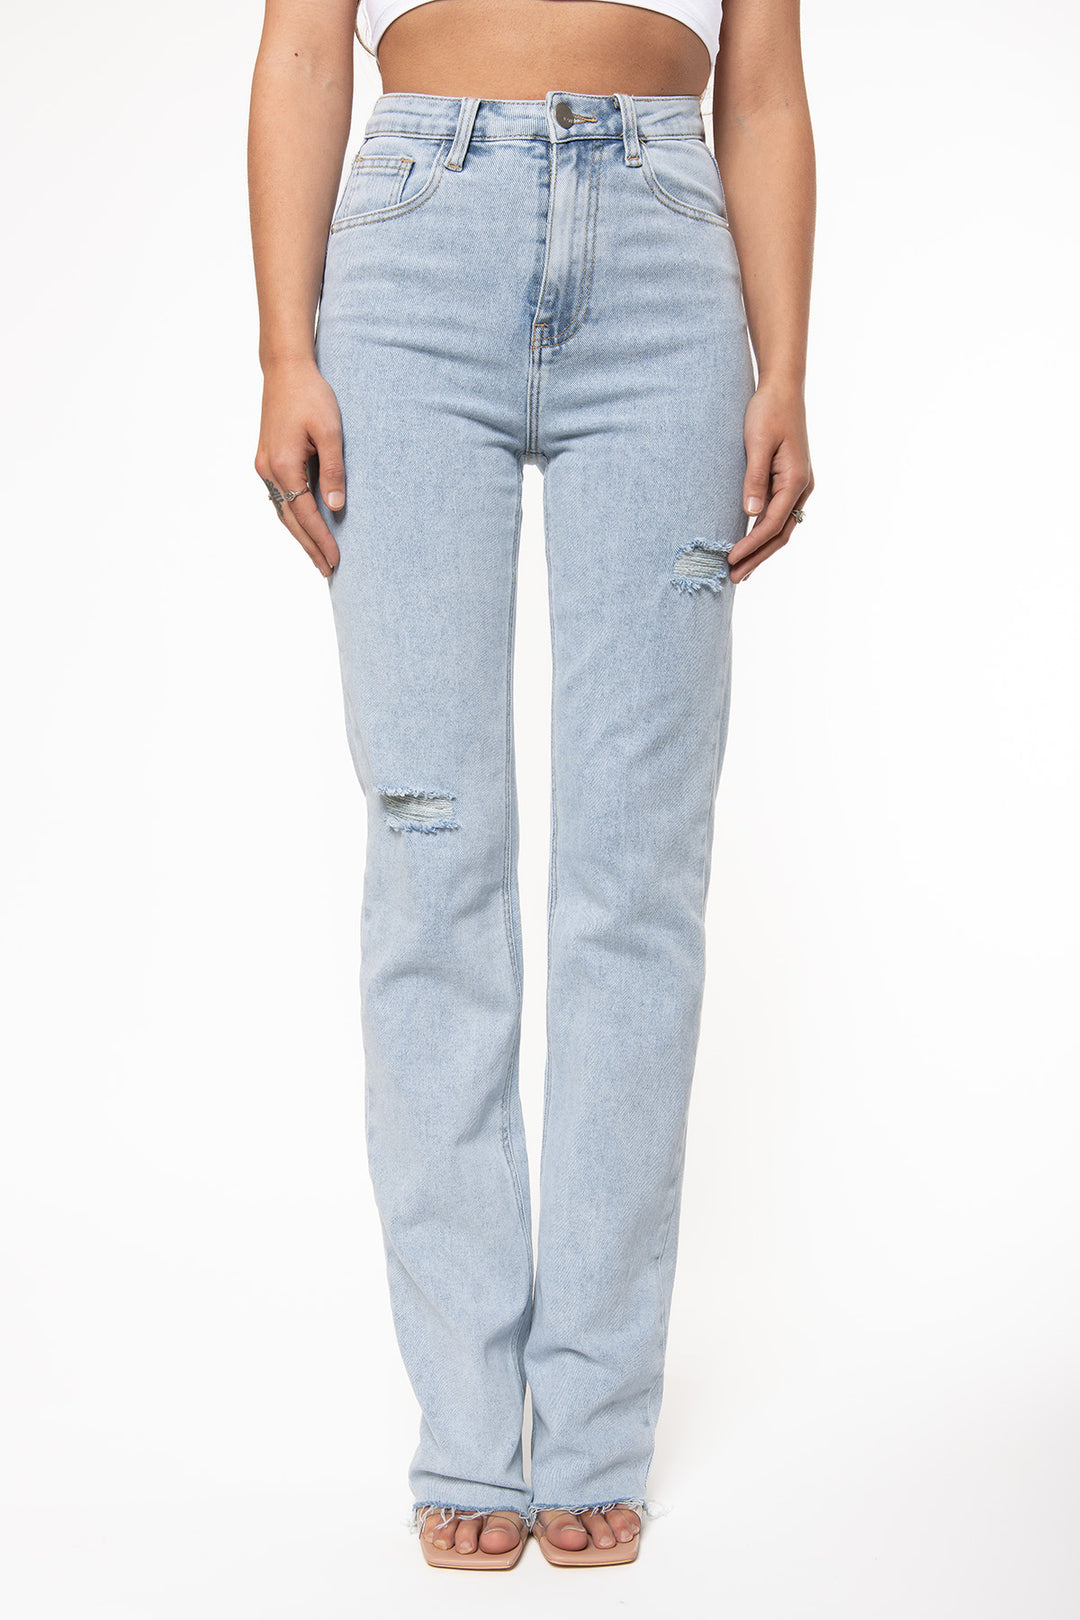 Harper Stretch Straight Leg Jeans - EXTRA TALL Jeans Routines Fashion   